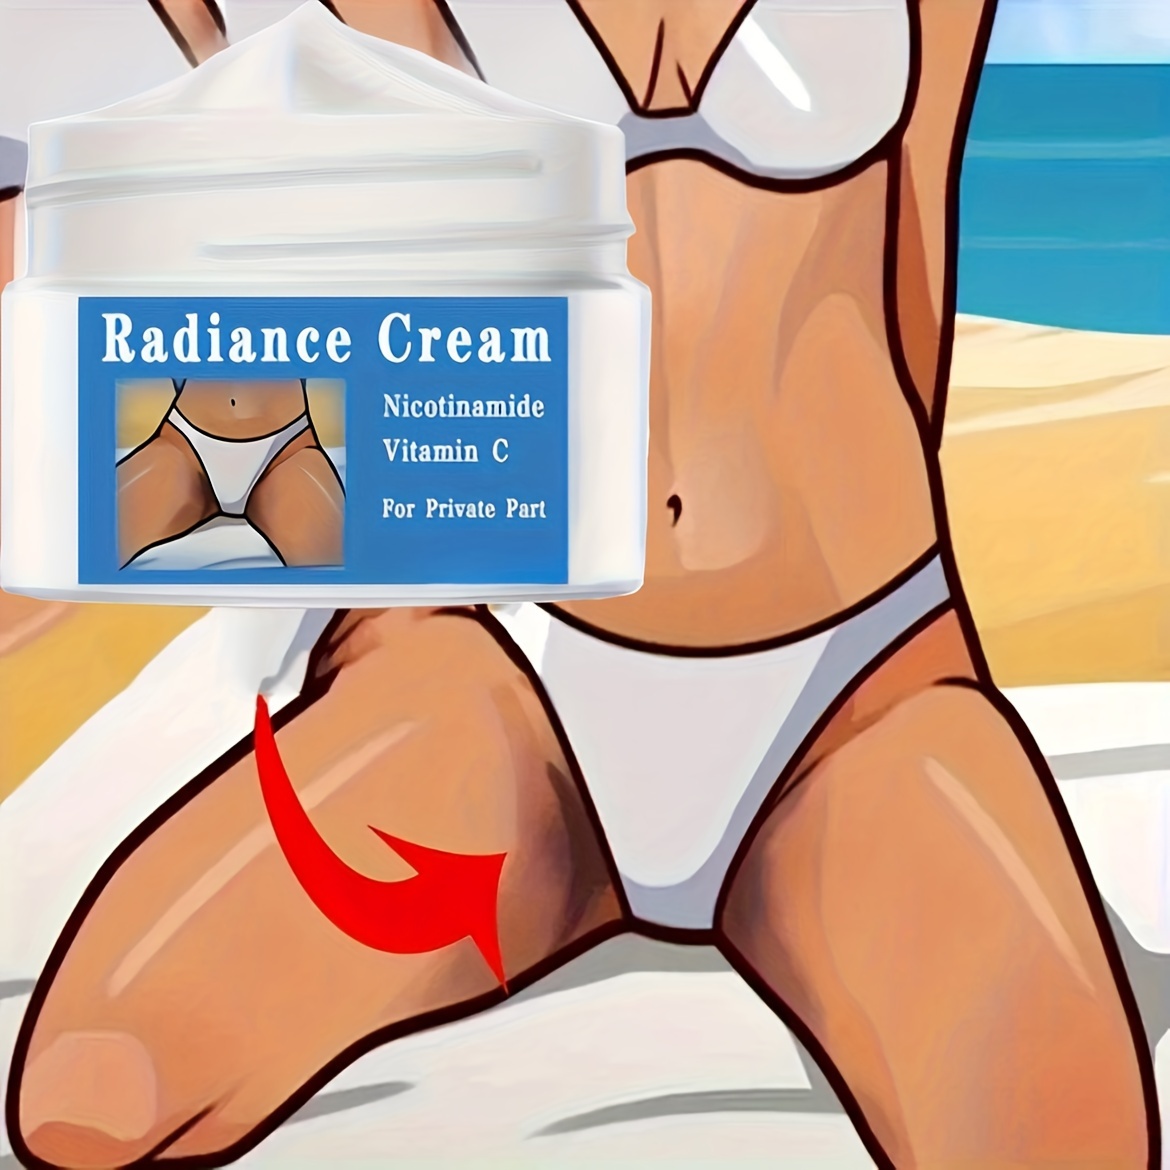 South Beach Instant Results Kit: The Best Anal Bleaching Cream